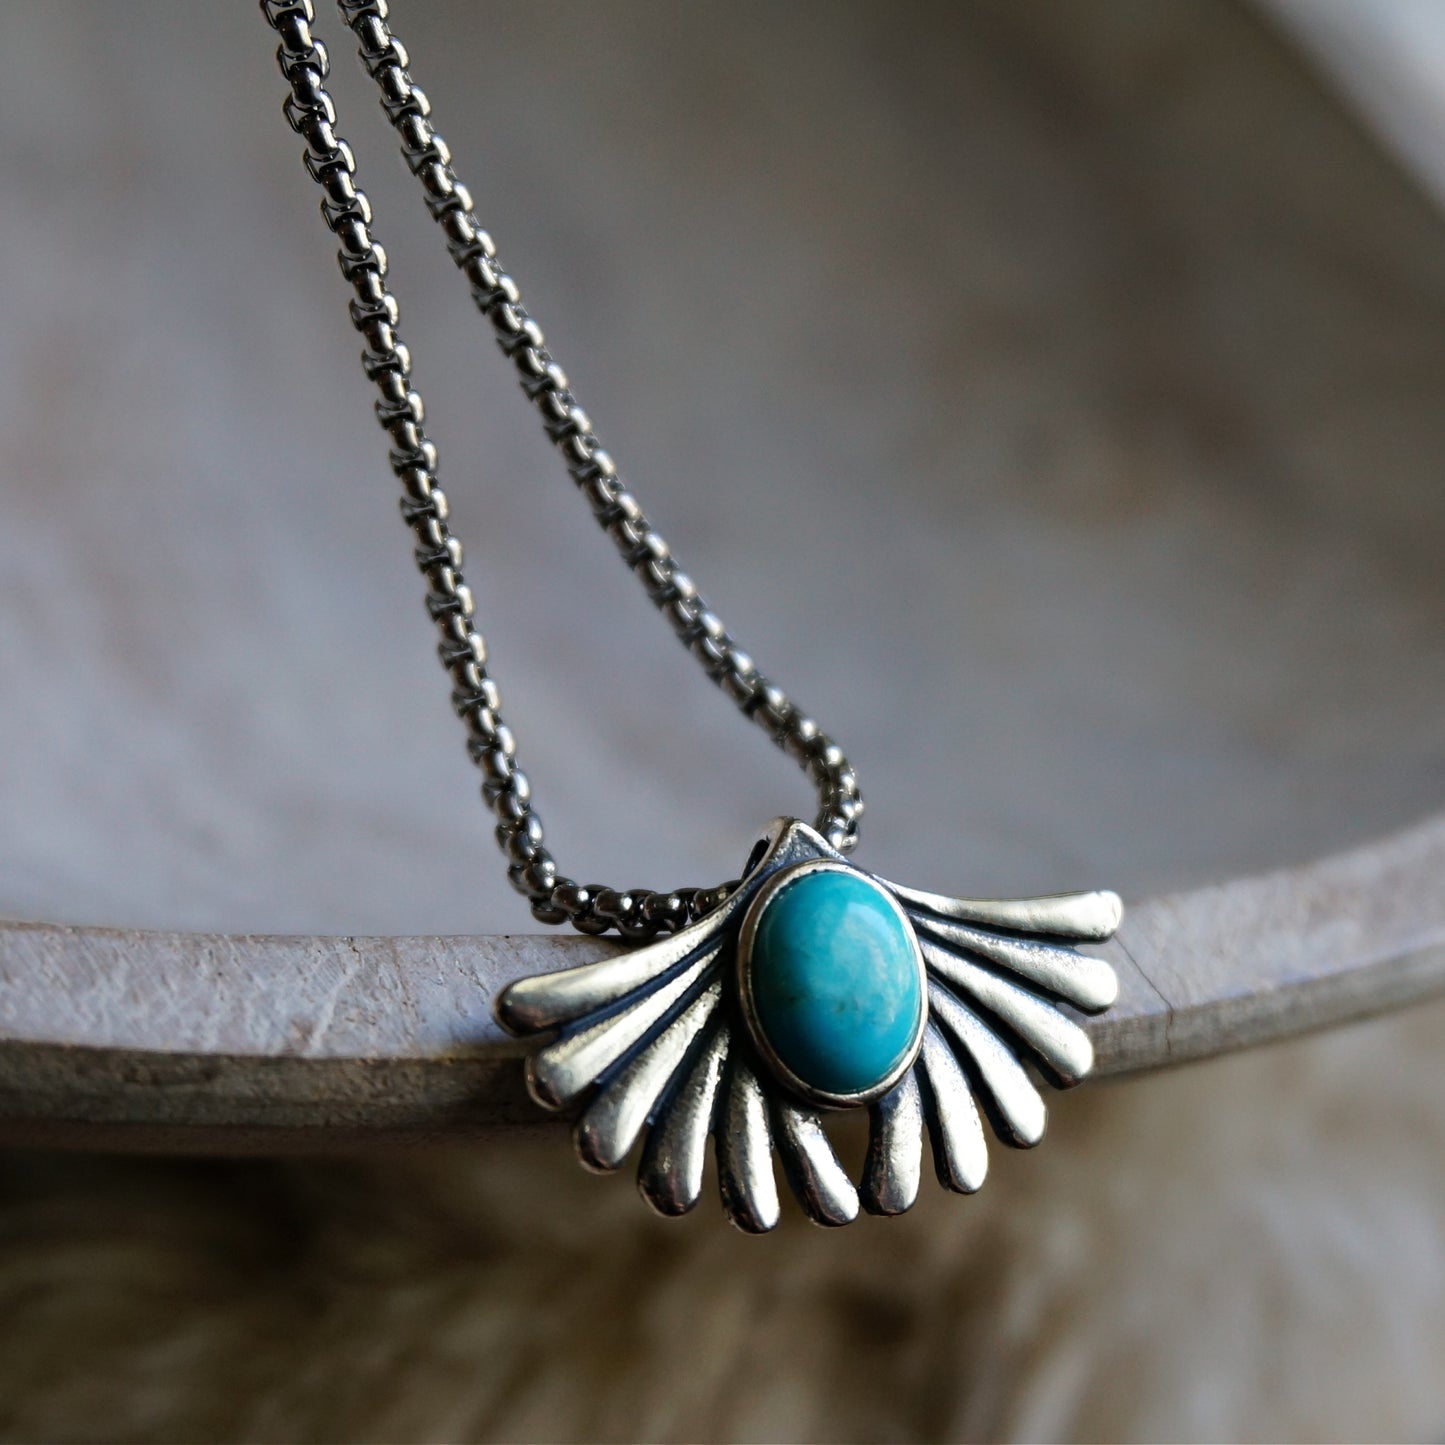 Prayer Turquoise Necklace - SOWELL JEWELRY